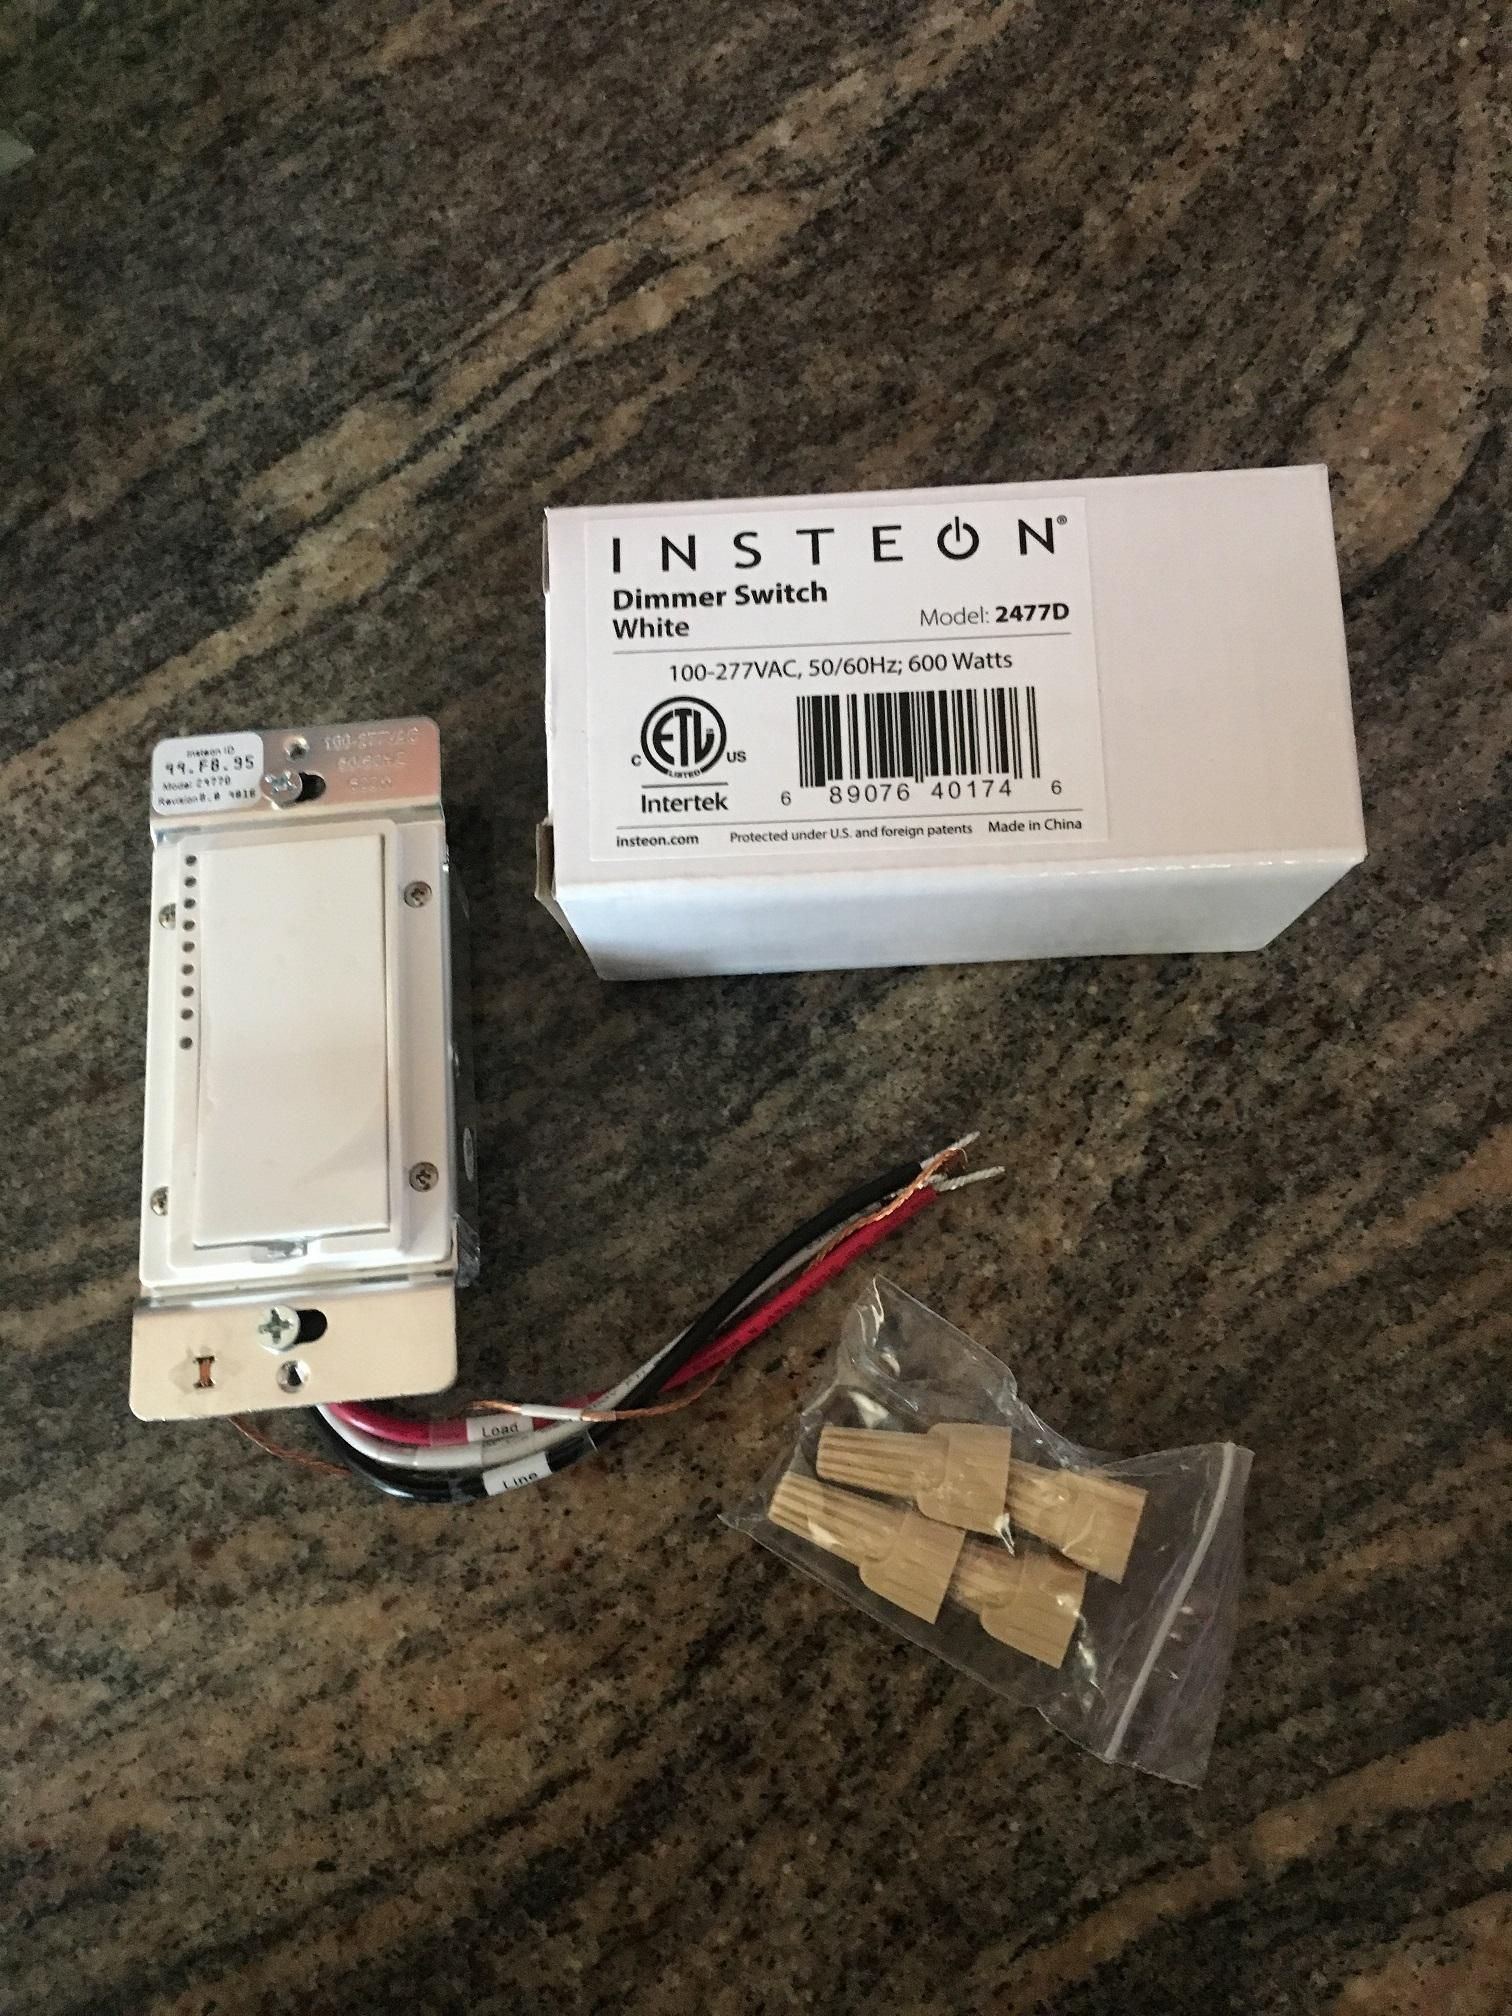 A Photo of Insteon Dimmer Switch on a countertop